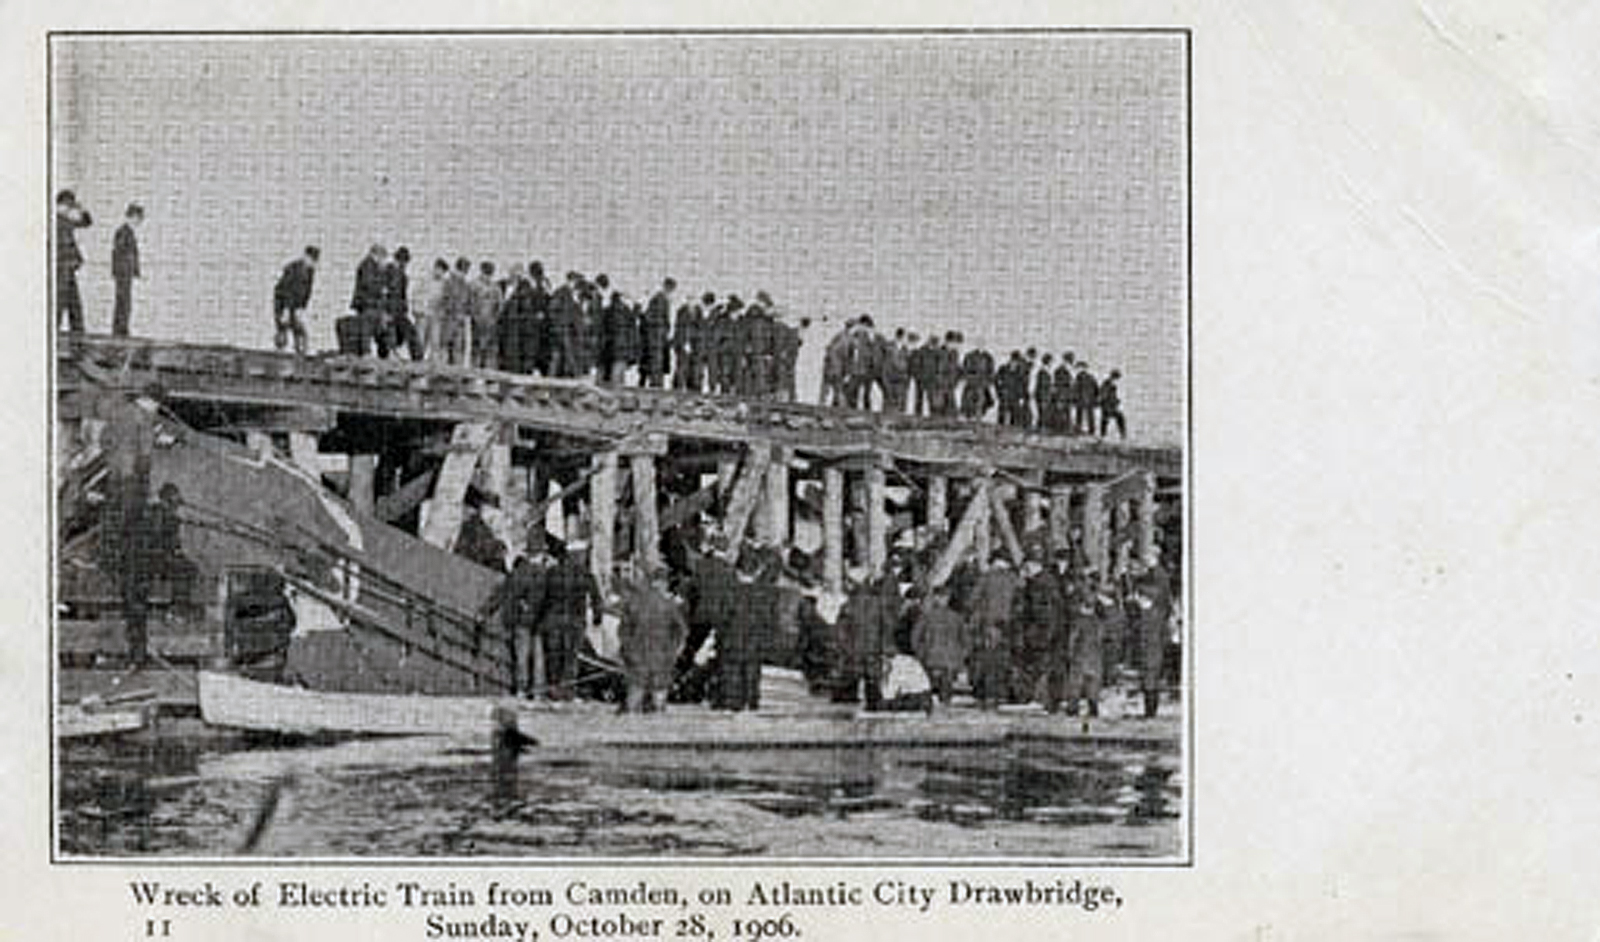 Atlantic City - Wreck of the electric train from Camden - 1906